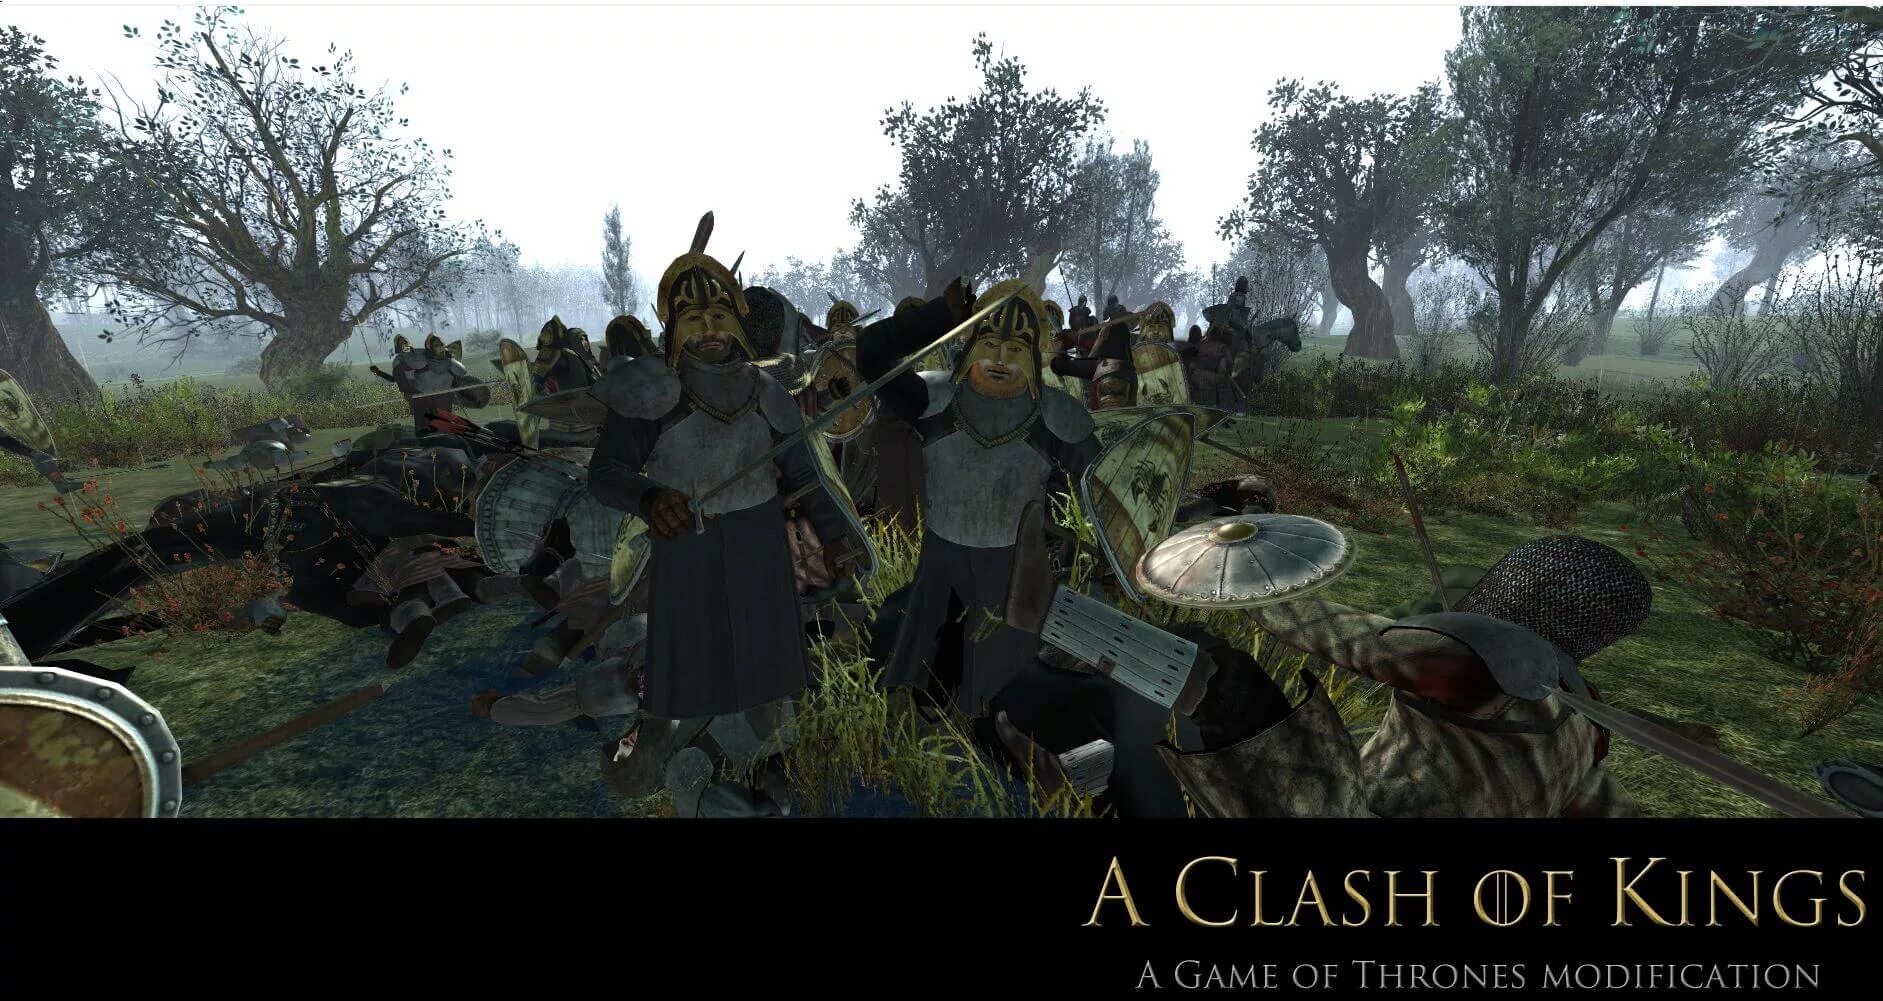 Mount and Blade a Clash of Kings 8.0. Mount & Blade Warband "a Clash of Kings 4.1 (Rus).